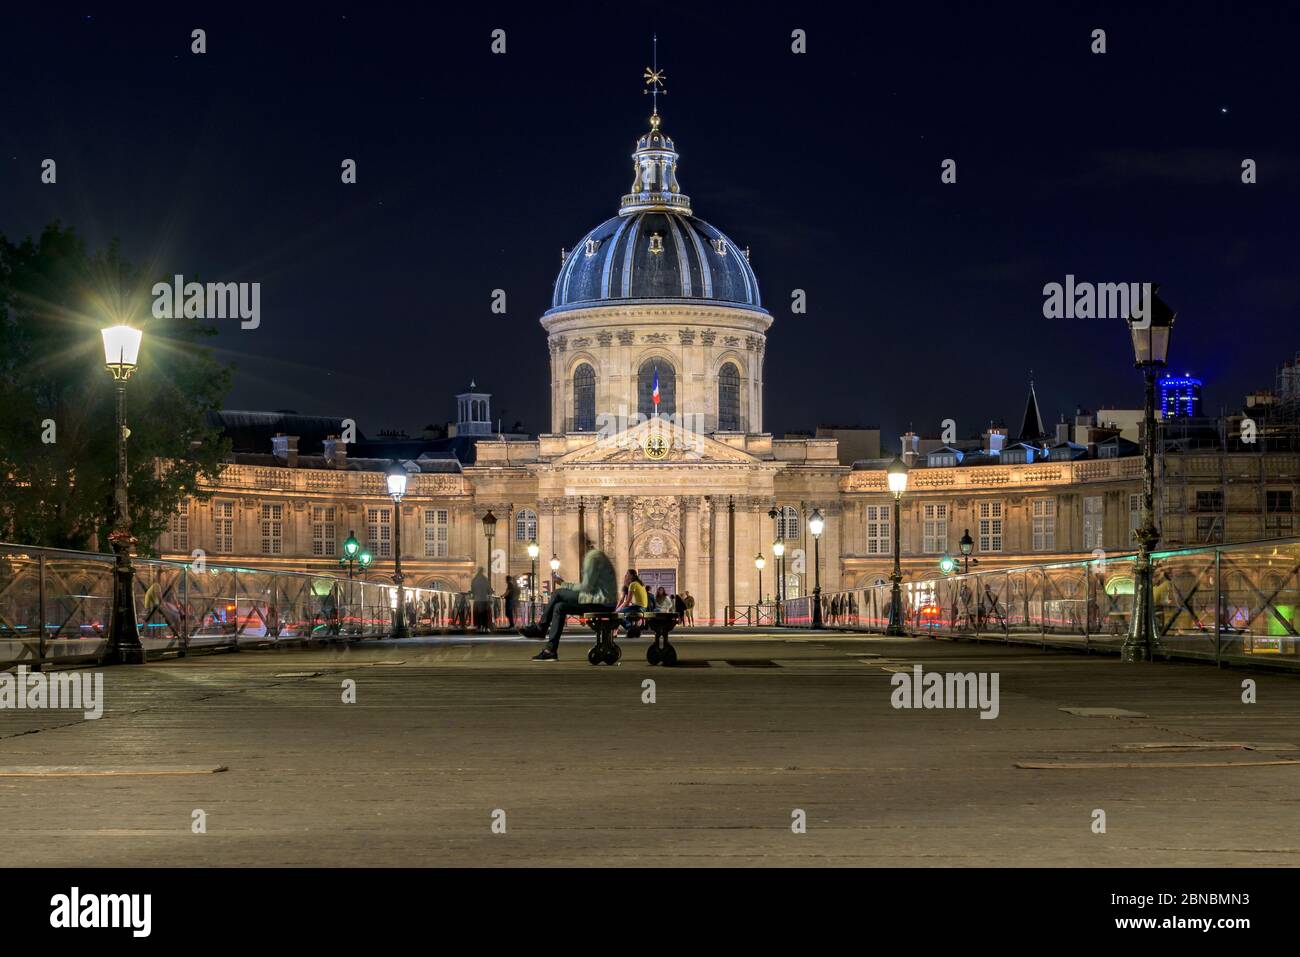 Paris, France. Night time long exposure of the Pont des Arts bridge and the illuminated Institut de France, grand cupola topped building baroque style. Stock Photo